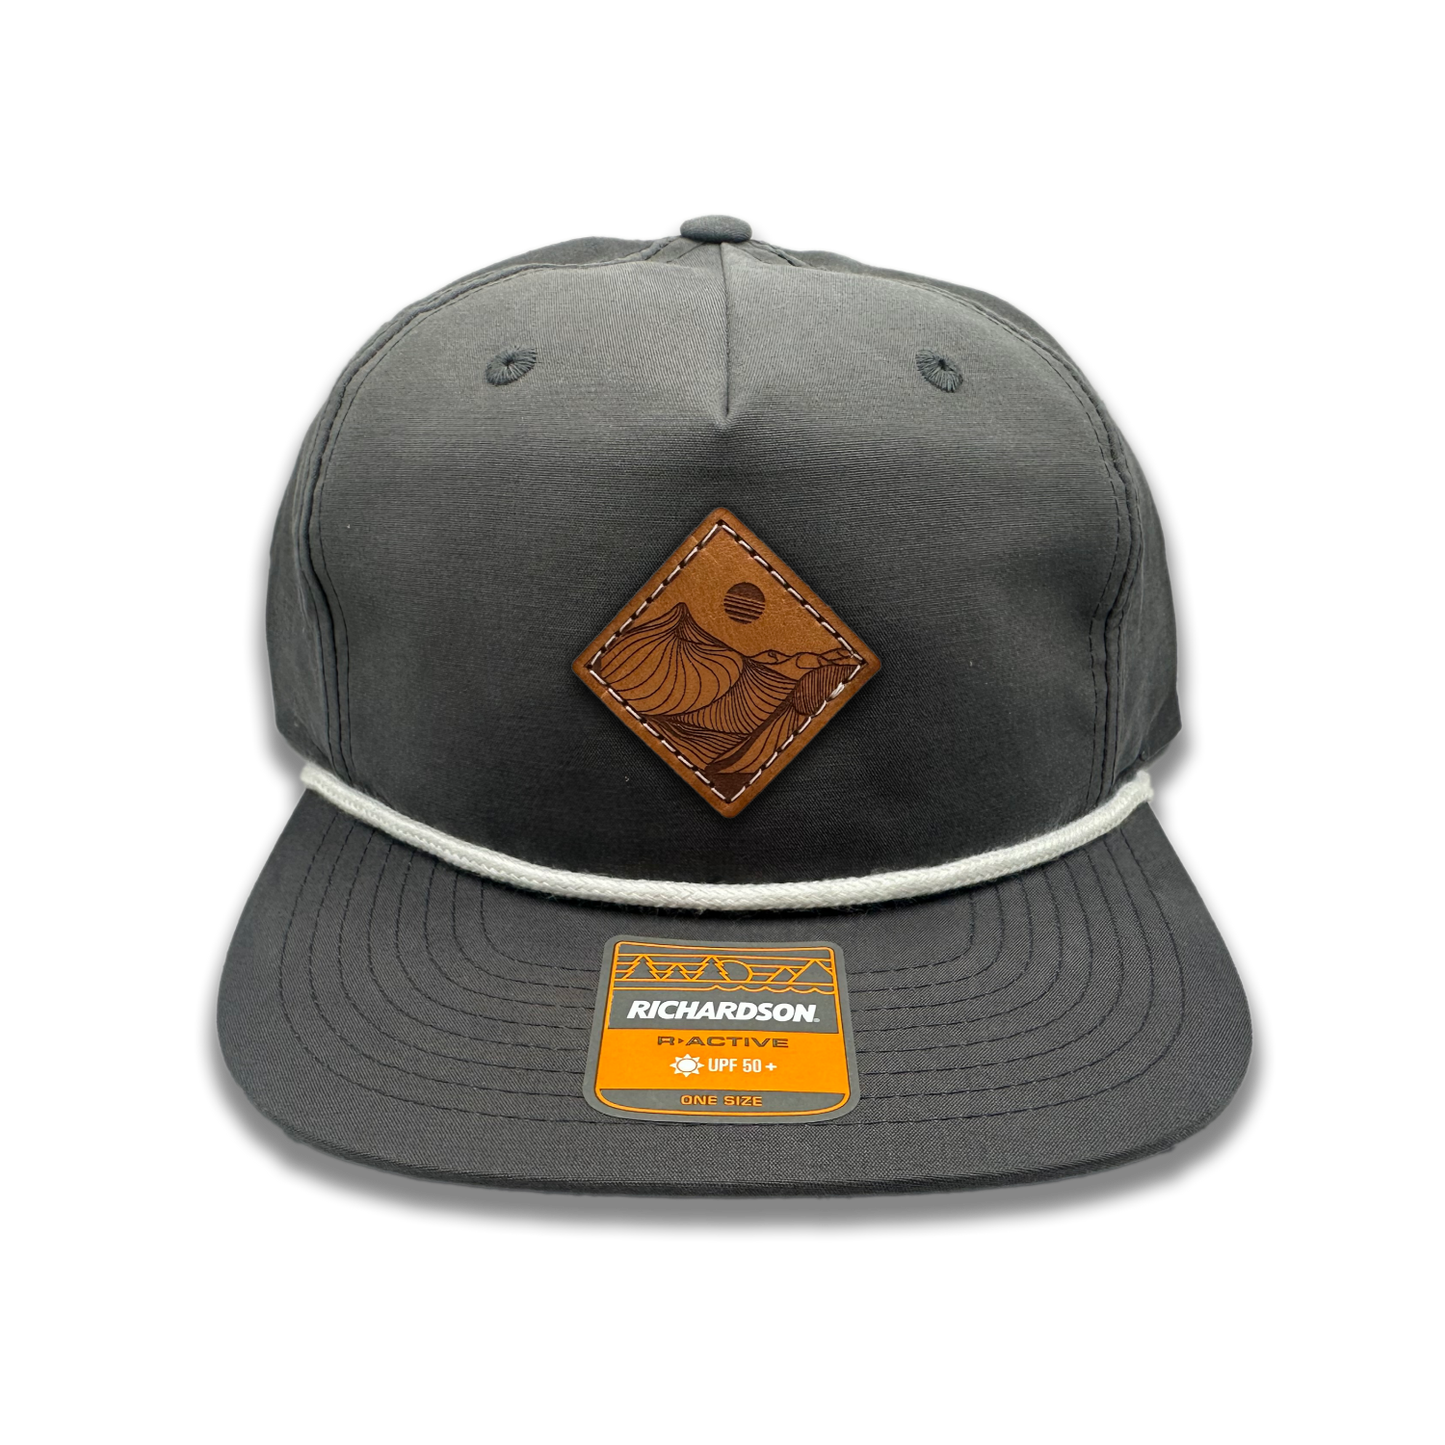 Get a taste of rugged charm with the Charcoal Richardson 256 Rope Umpqua Hat. Made in Colorado, USA, this low profile SnapBack cap features a stylish Desert Mountain patch design. The genuine leather patch, laser engraved and sewn on, adds a touch of sophistication to this flatbill hat crafted from lightweight material.